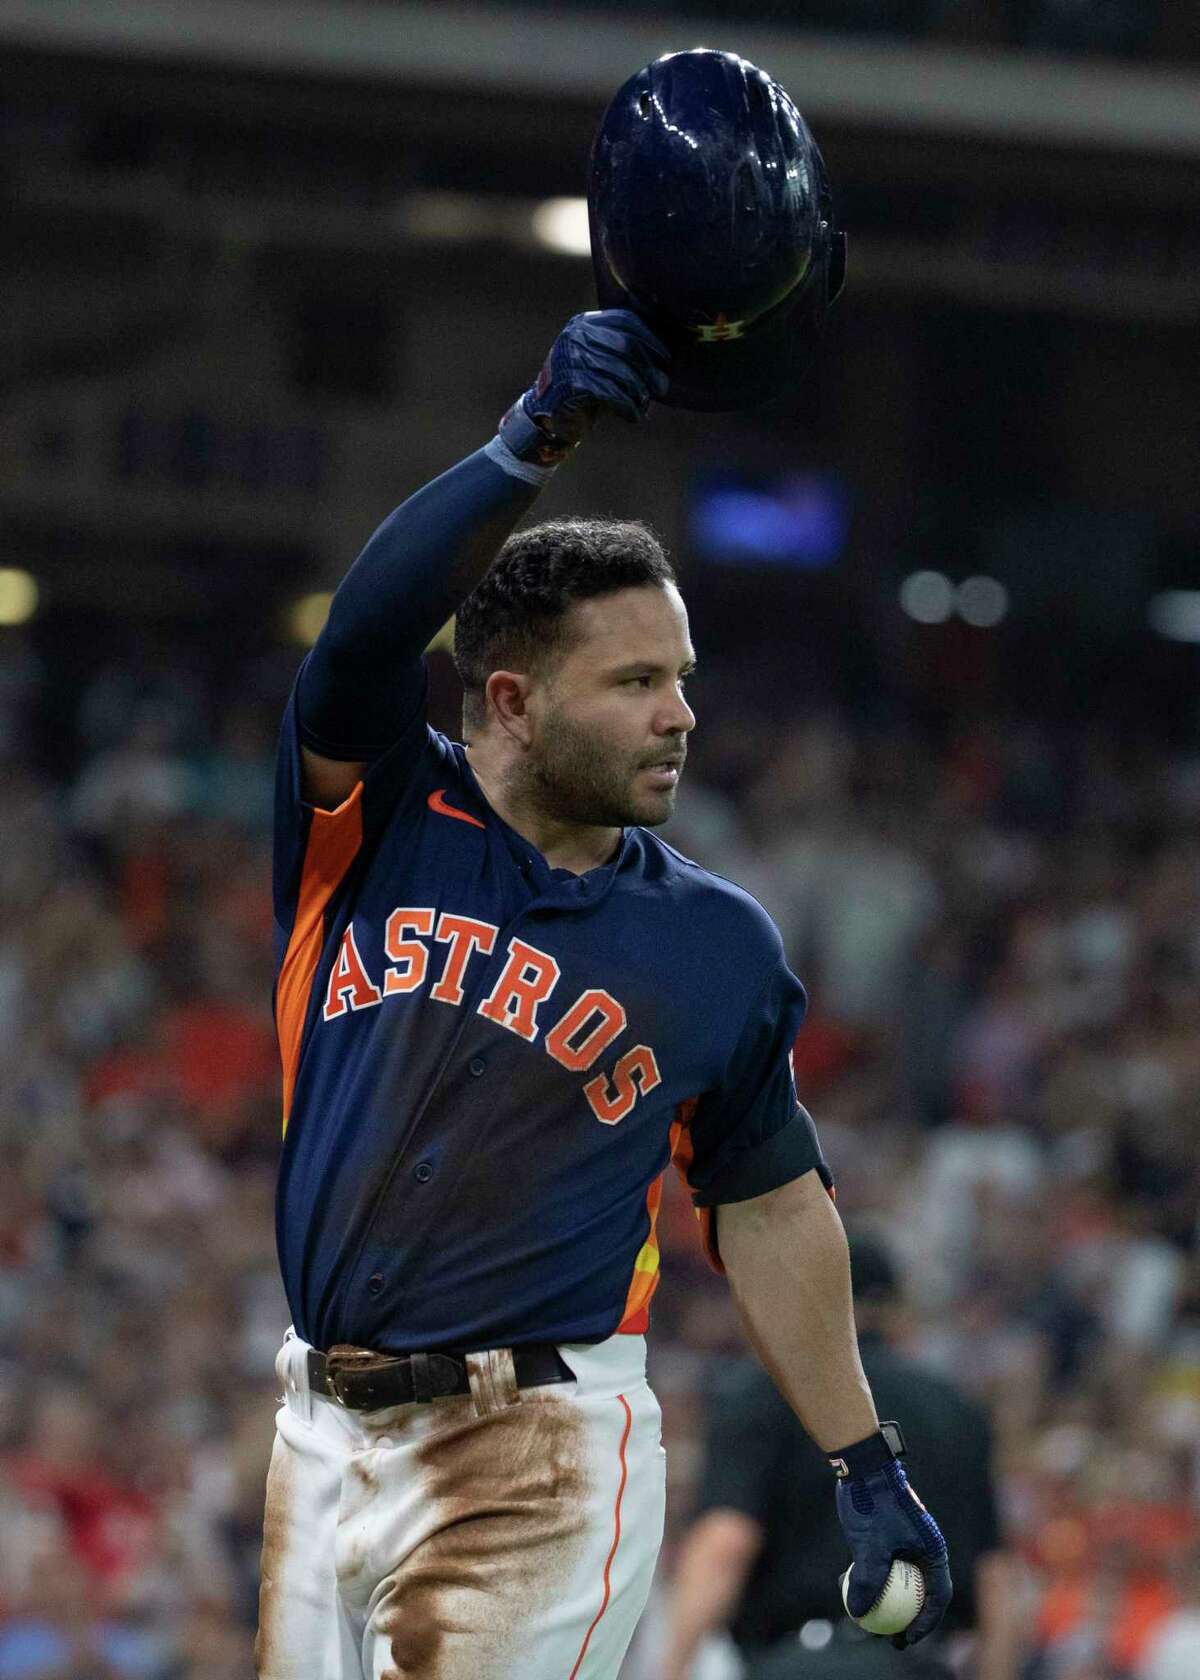 Jose Altuve of the Houston Astros at the 2014 MLB All-Star Game batting  practice jersey